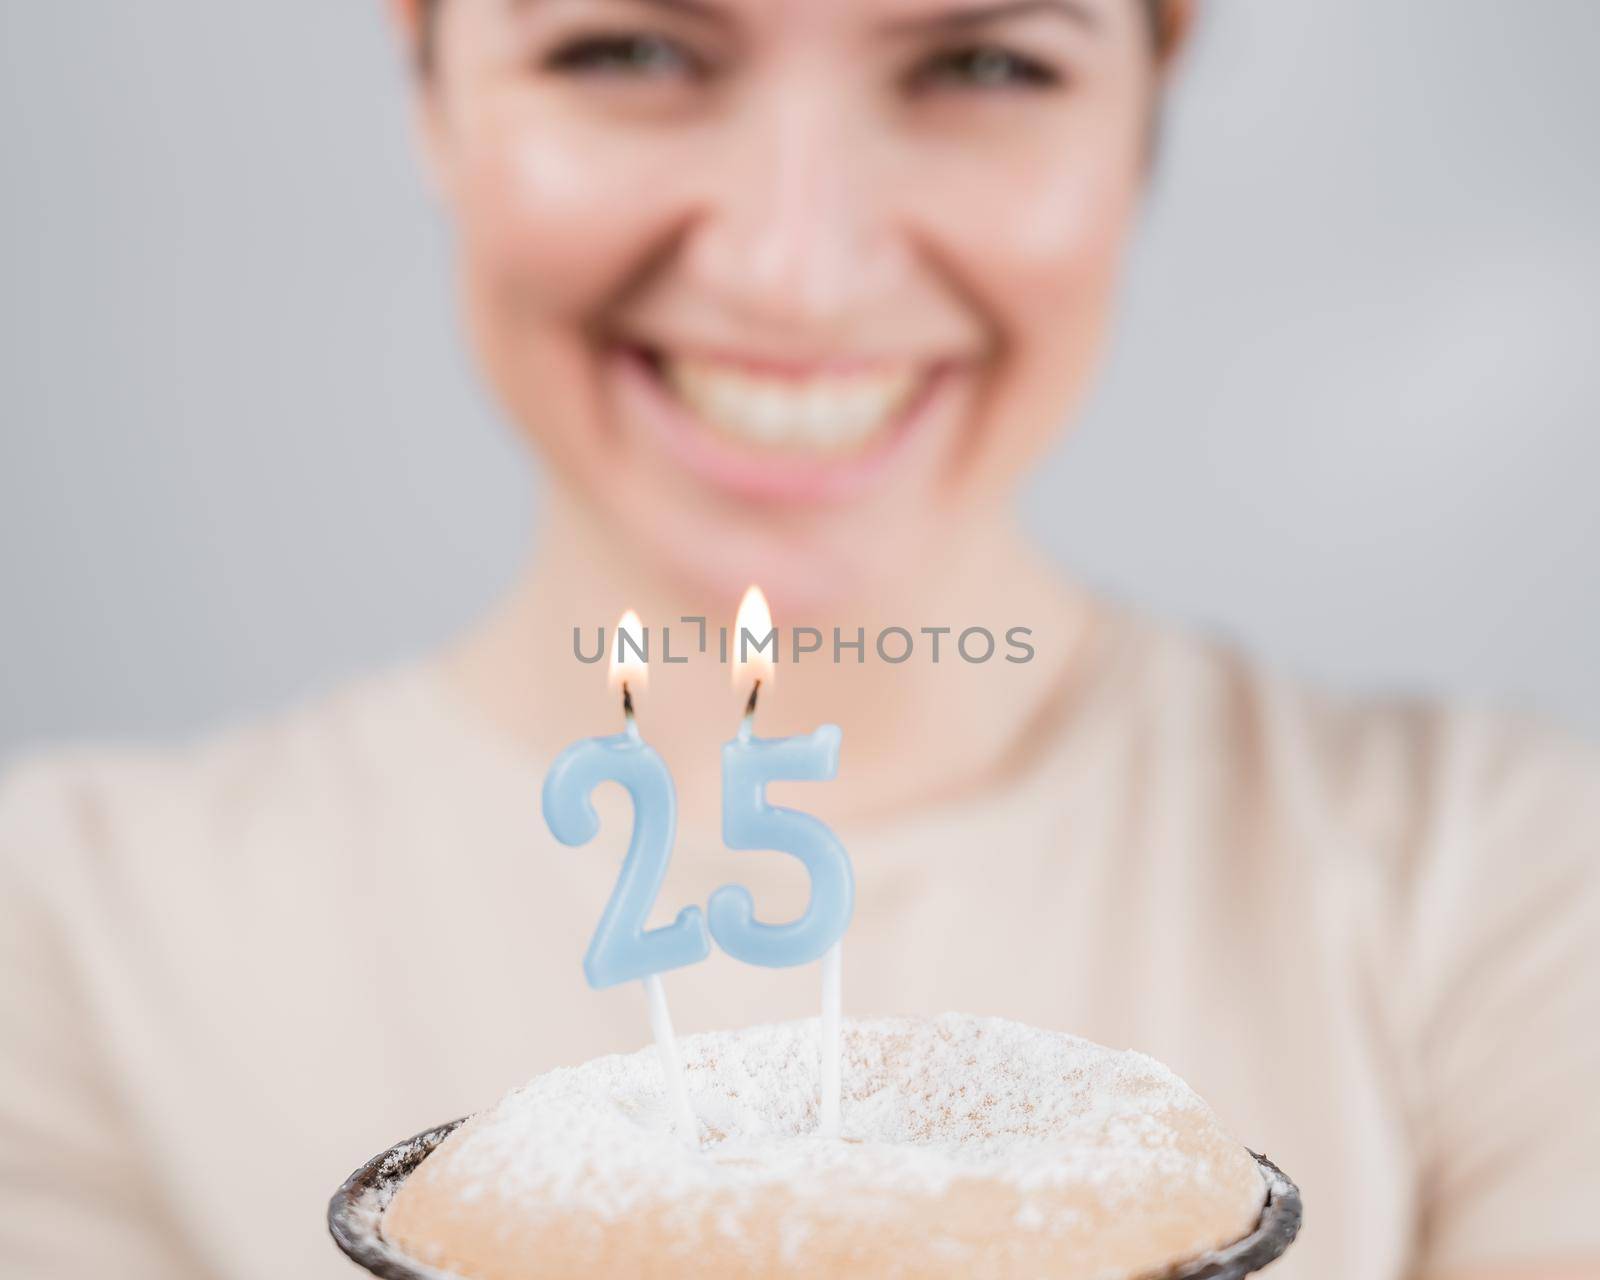 The happy woman makes a wish and blows out the candles on the 25th birthday cake. Girl celebrating birthday. by mrwed54